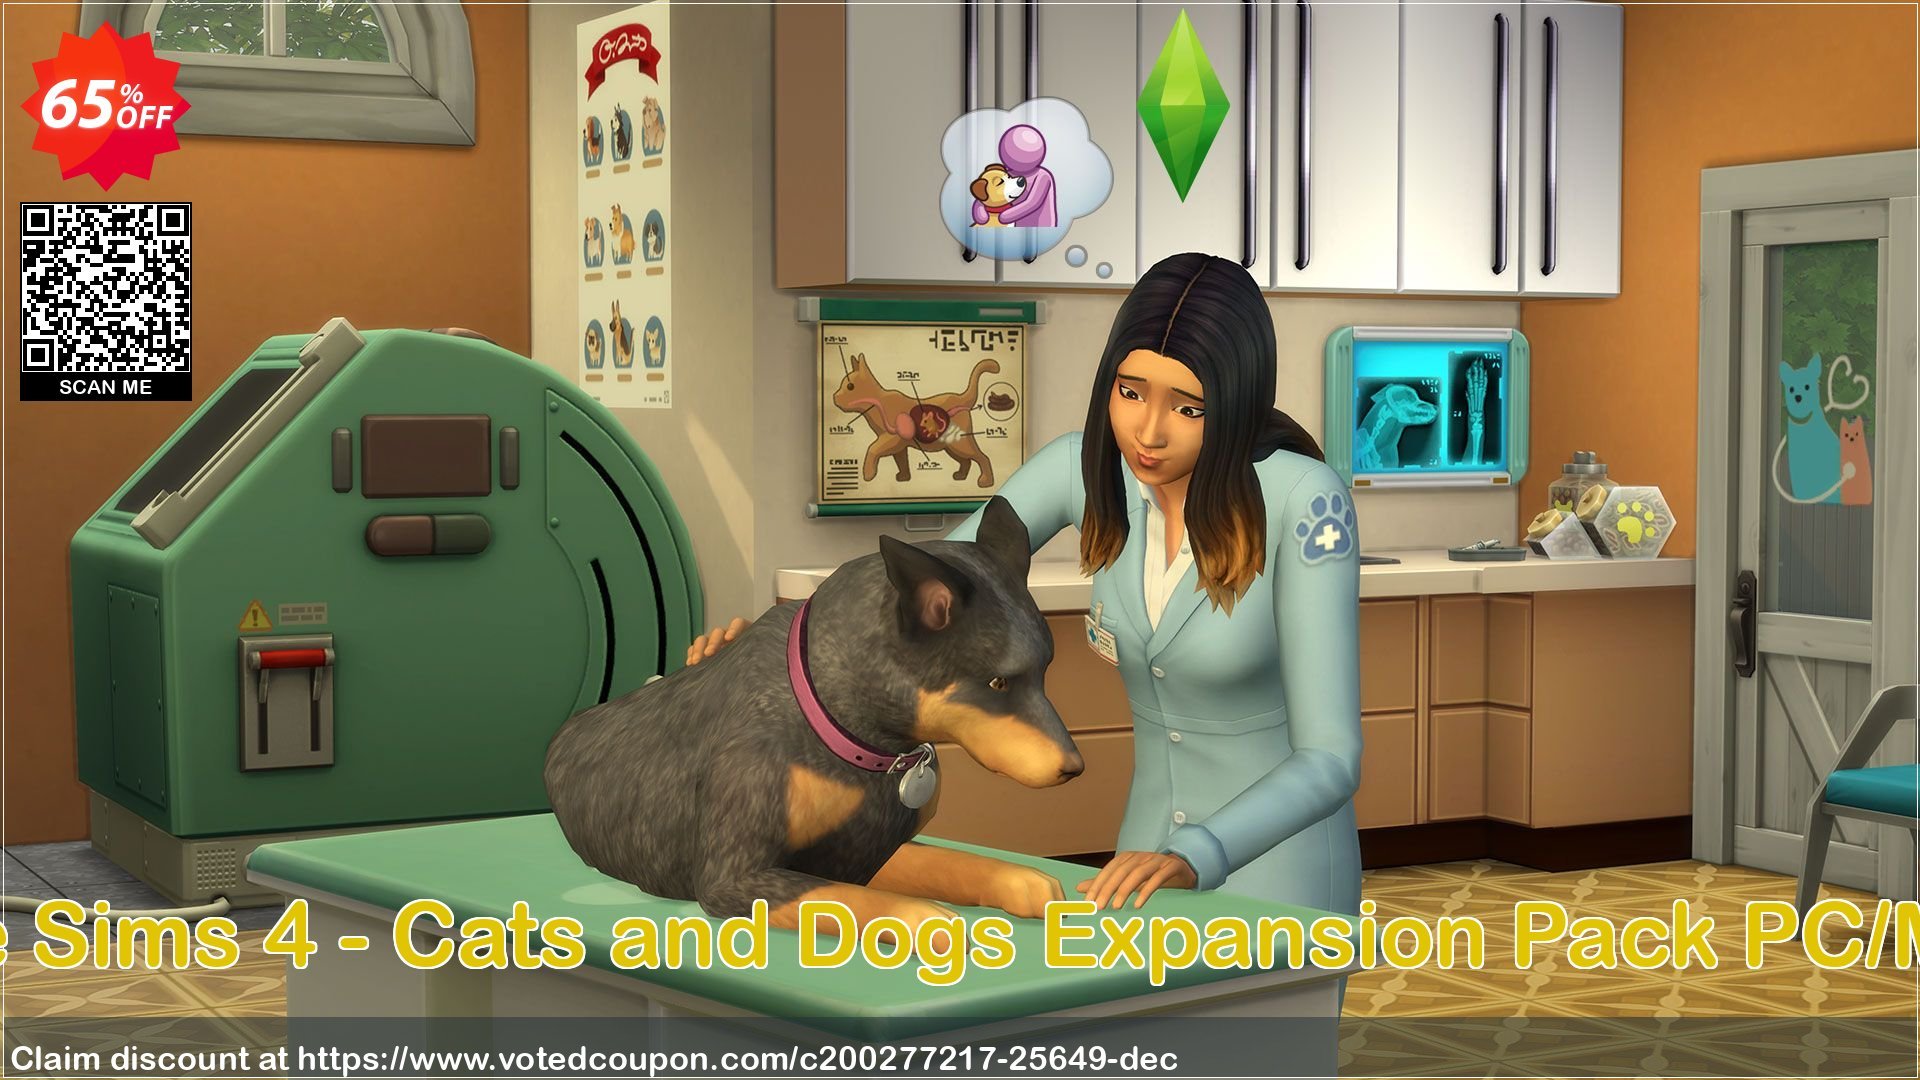 The Sims 4 - Cats and Dogs Expansion Pack PC/MAC Coupon Code Apr 2024, 65% OFF - VotedCoupon